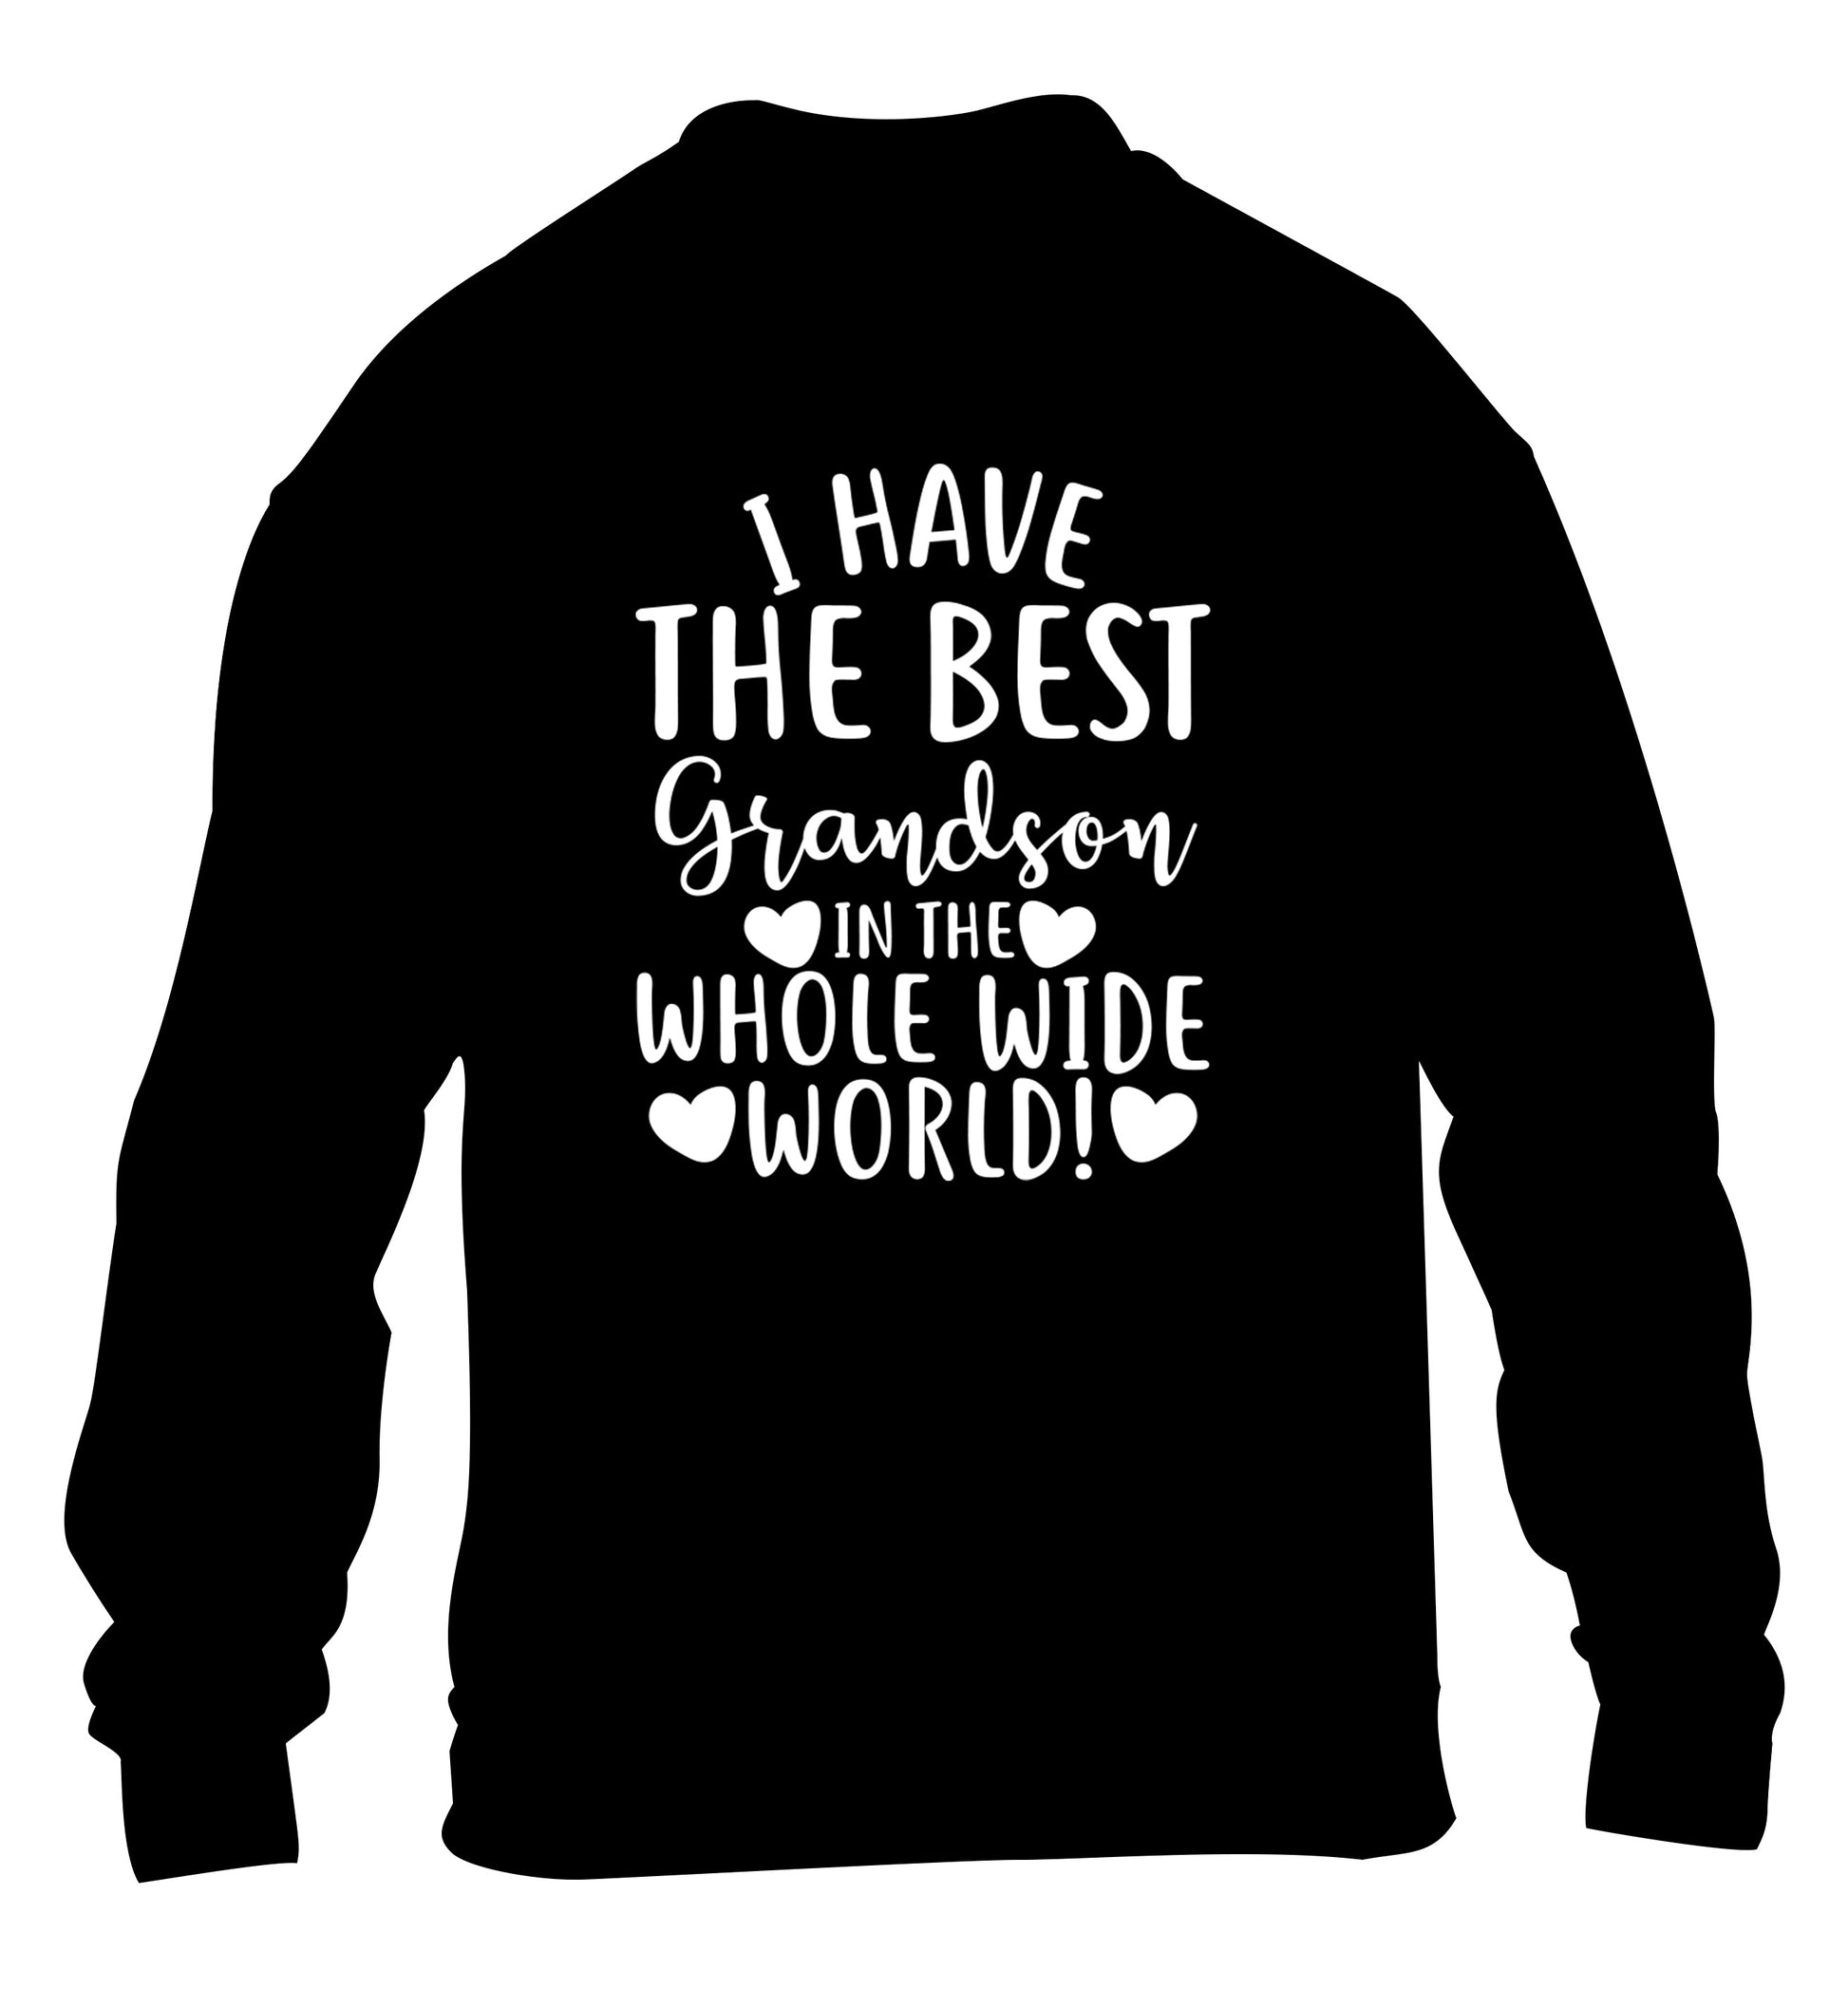 I have the best grandson in the whole wide world! children's black sweater 12-13 Years